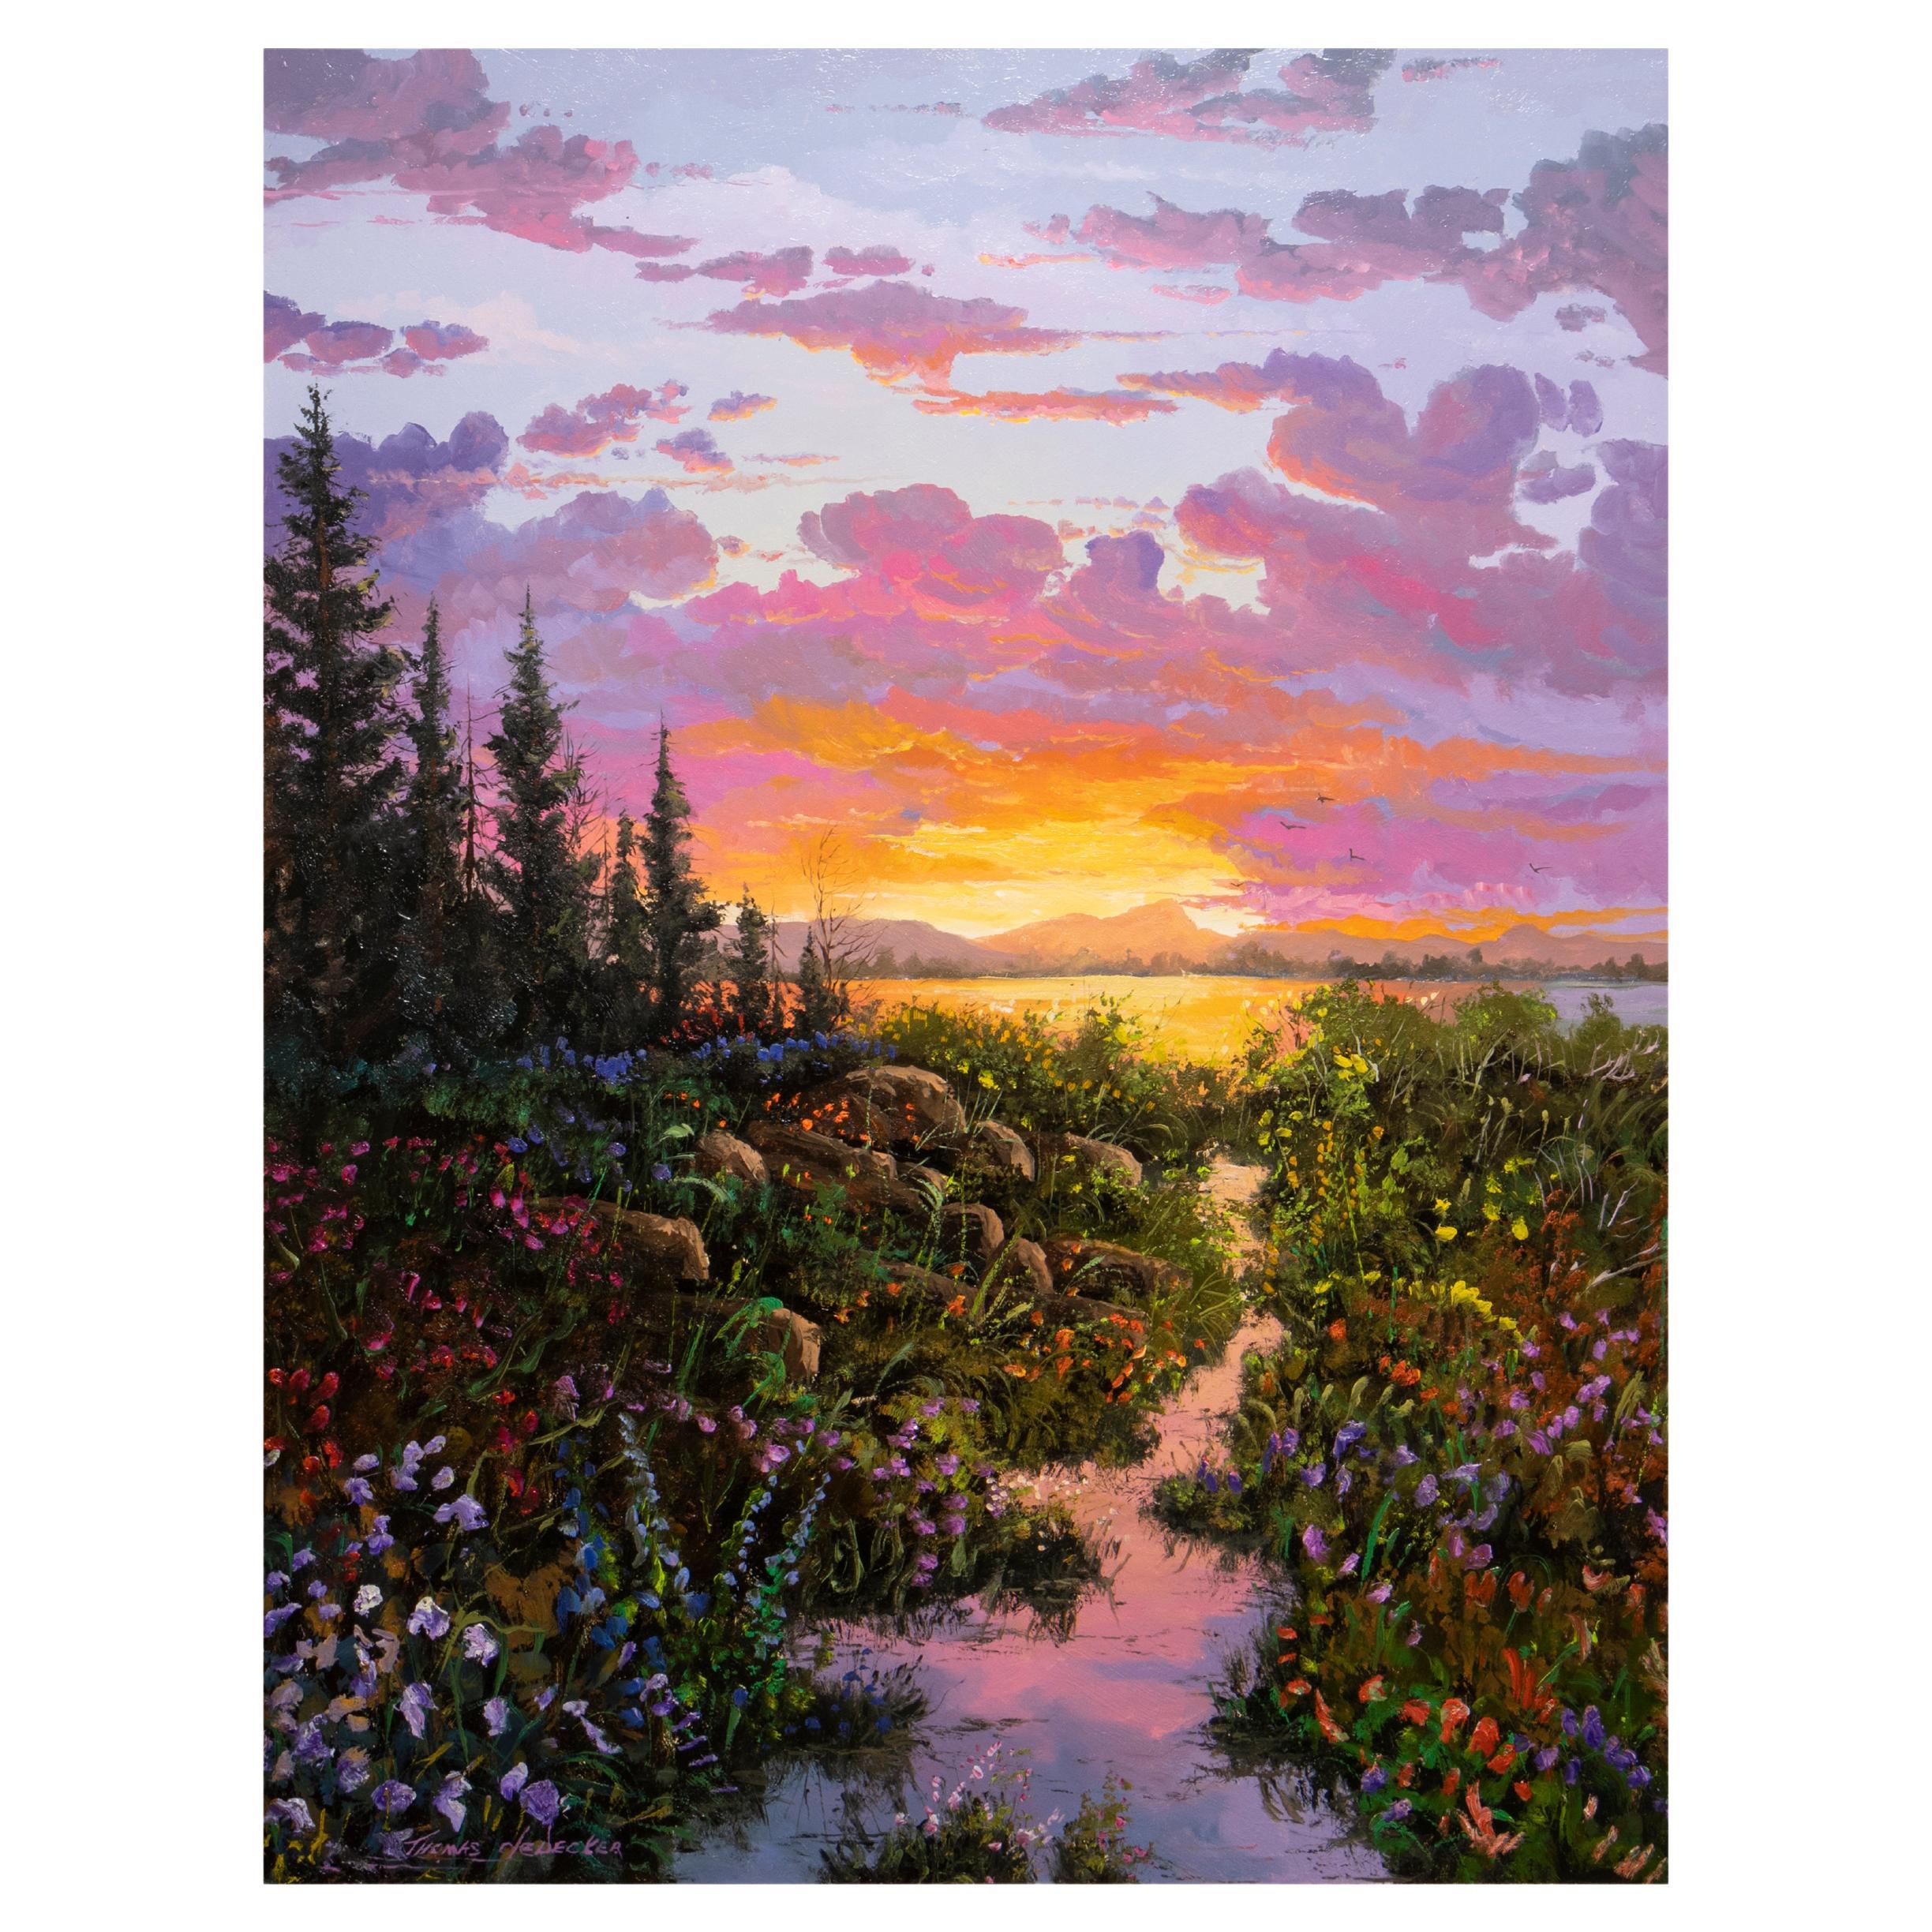 Original Painting "Summer's Day End" by Thomas deDecker For Sale